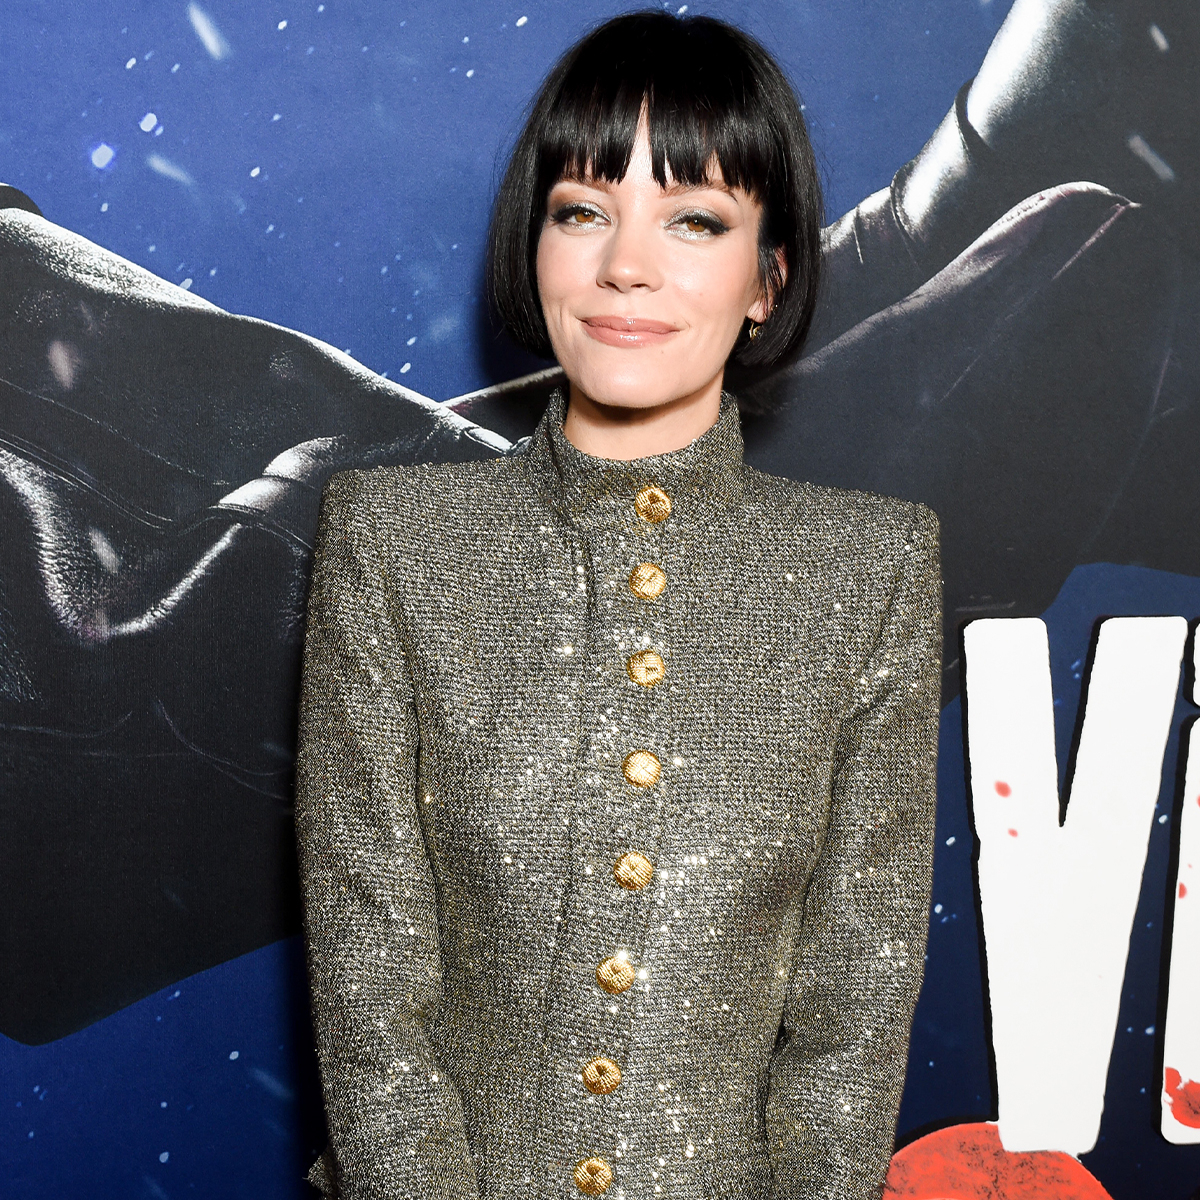 Lily Allen Responds to Backlash Over Her Comments About “Nepo Babies” – E! Online